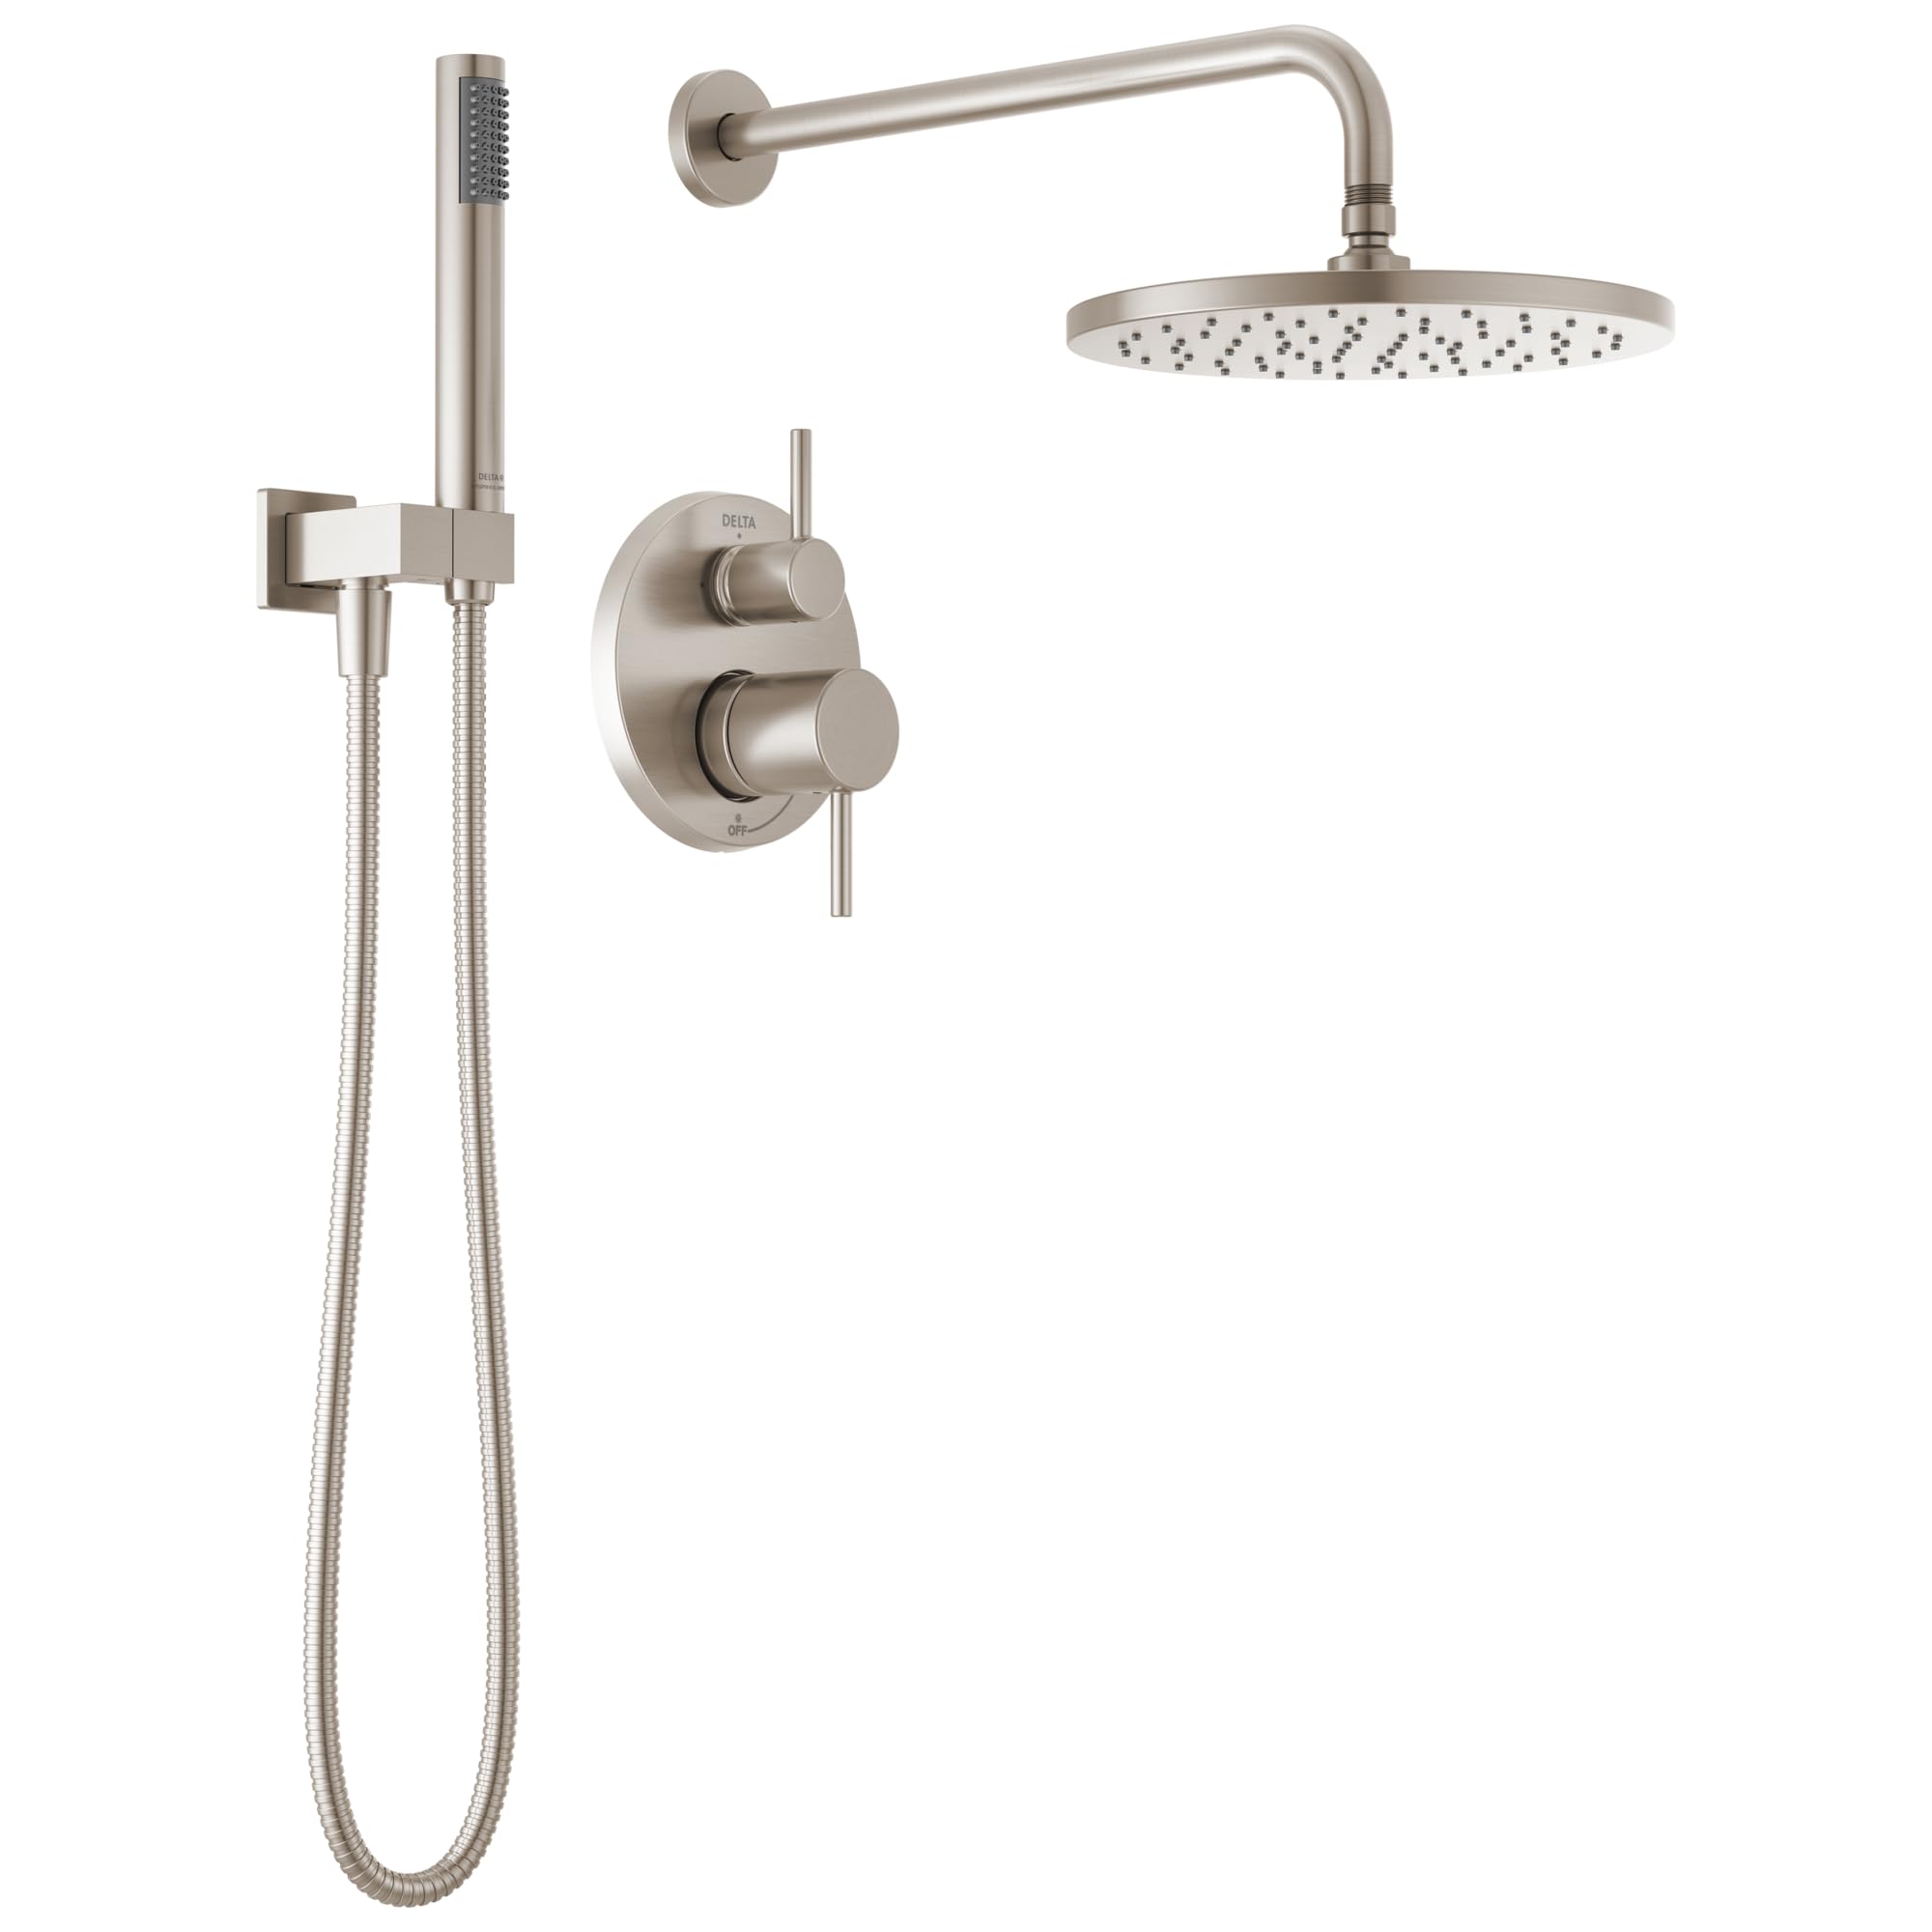 Delta Faucet Modern Raincan 2-Setting Round Shower System Including Rain Shower Head and Handheld Spray Brushed Nickel, Rainfall Shower System Brushed Nickel, Spotshield Stainless 342702-SP